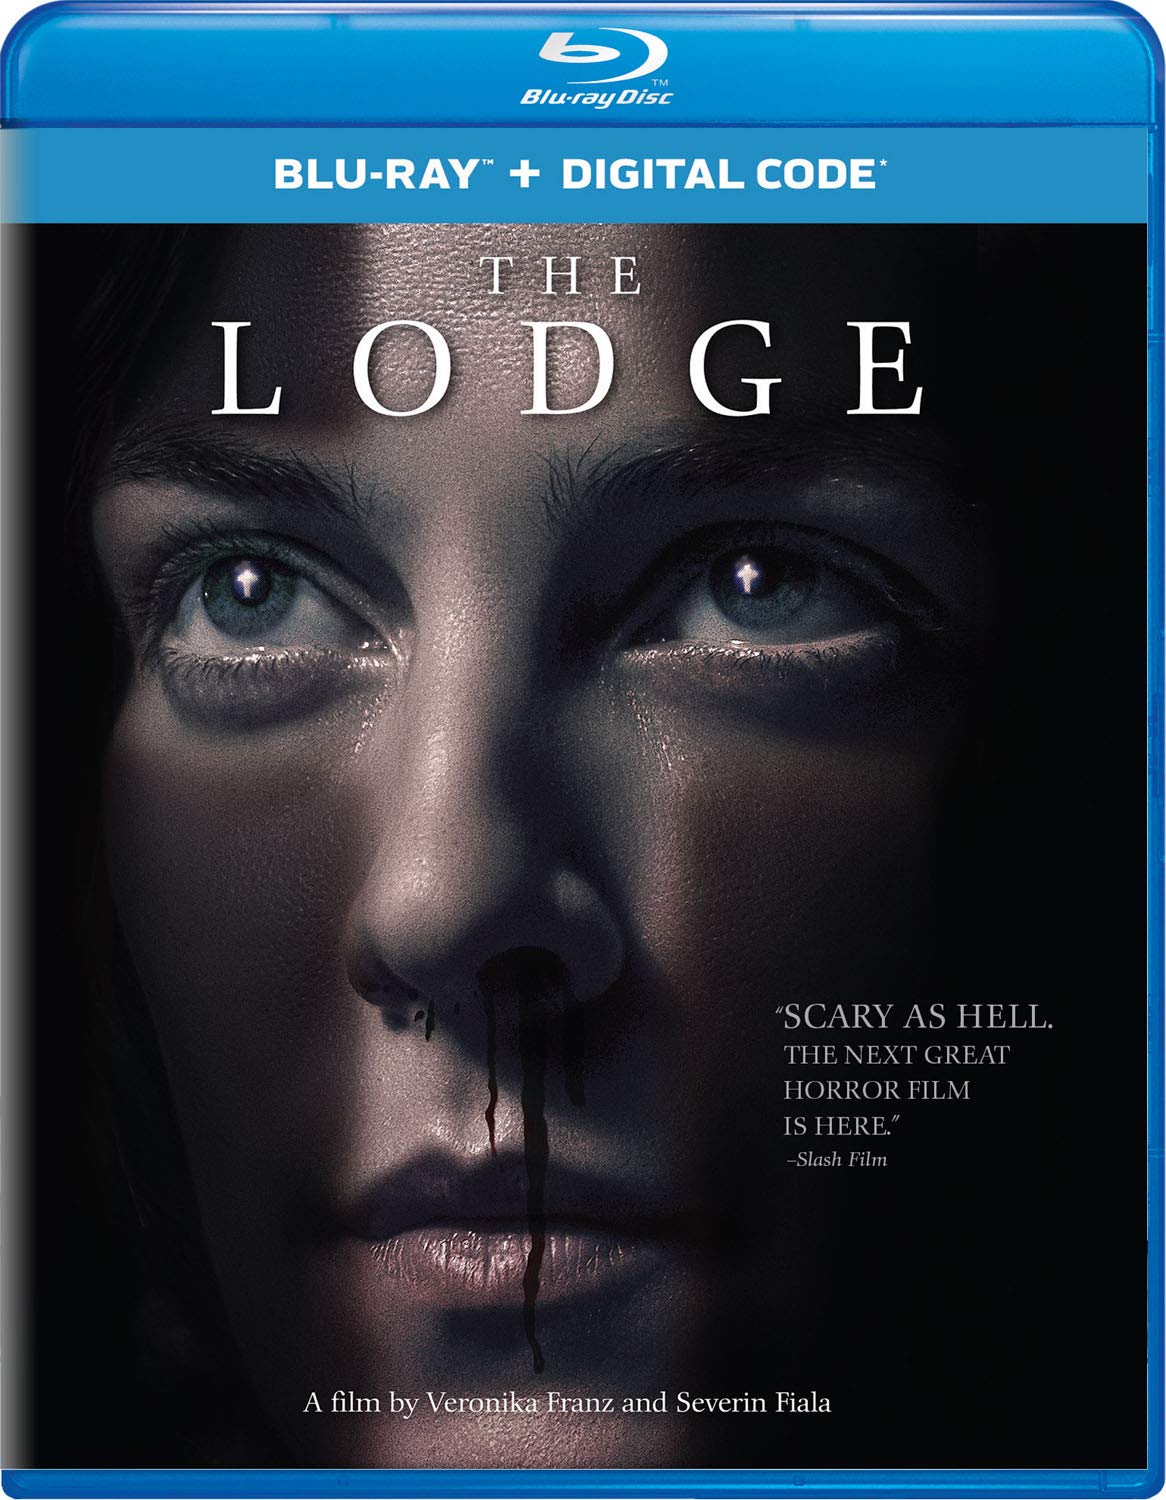 The Lodge DVD Release Date May 5, 2020